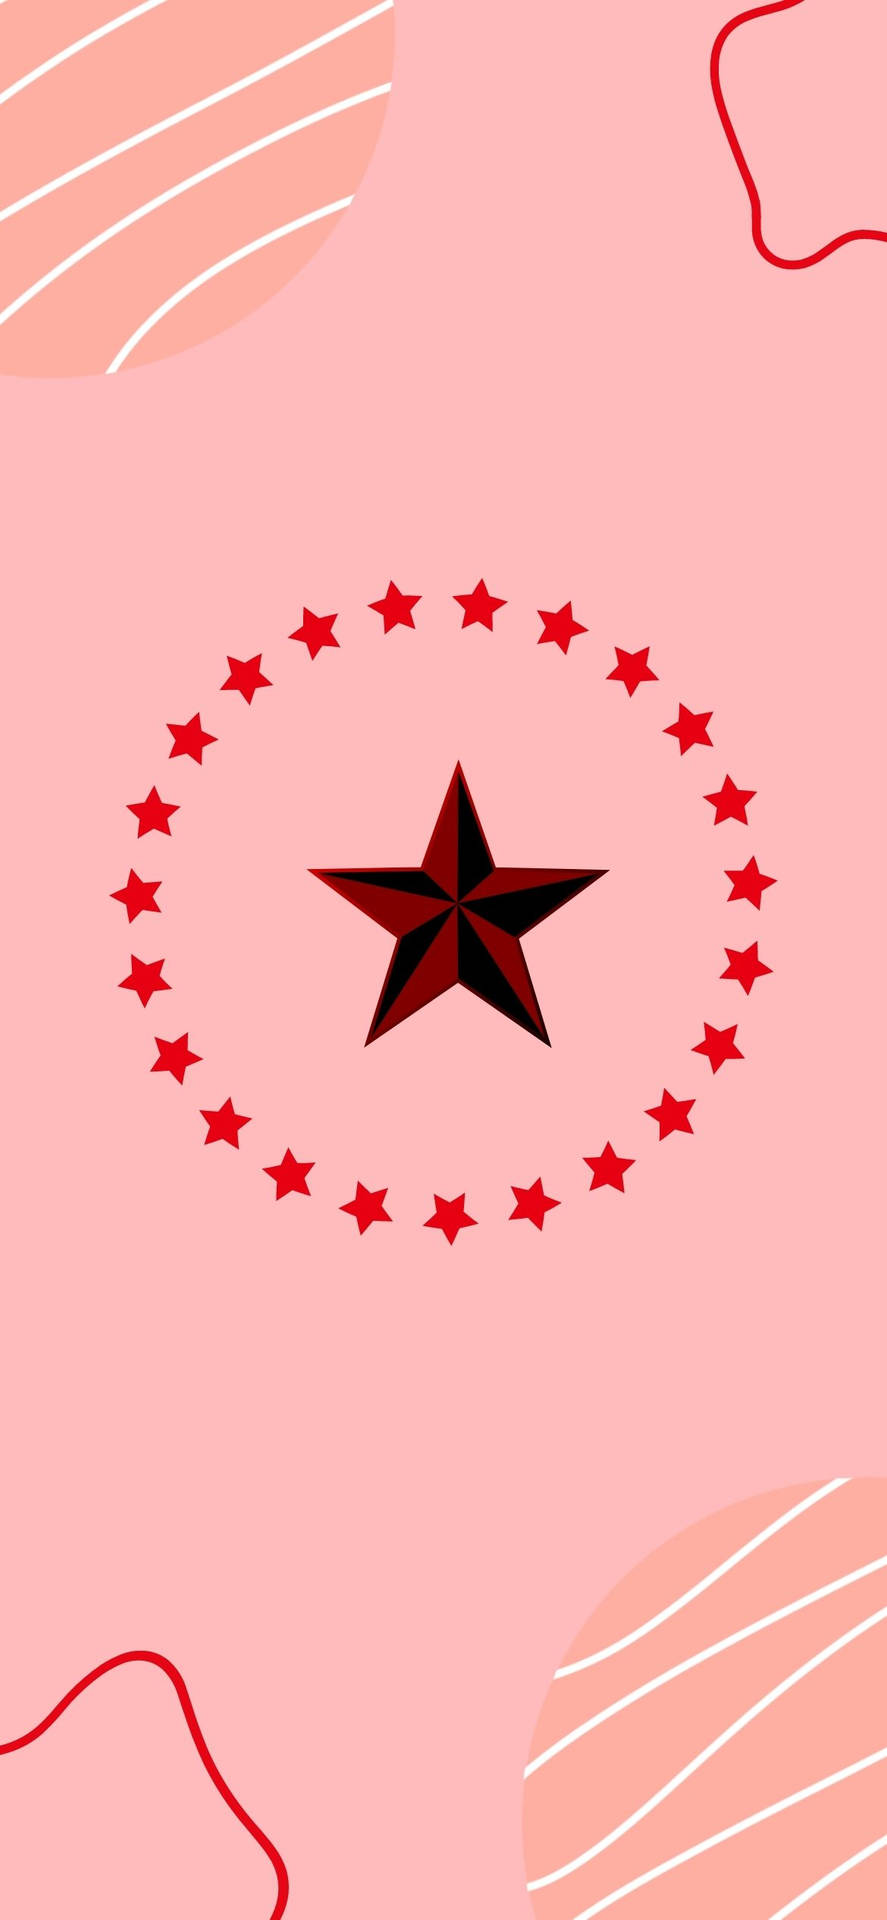 Red Nautical Star Vector Art Background